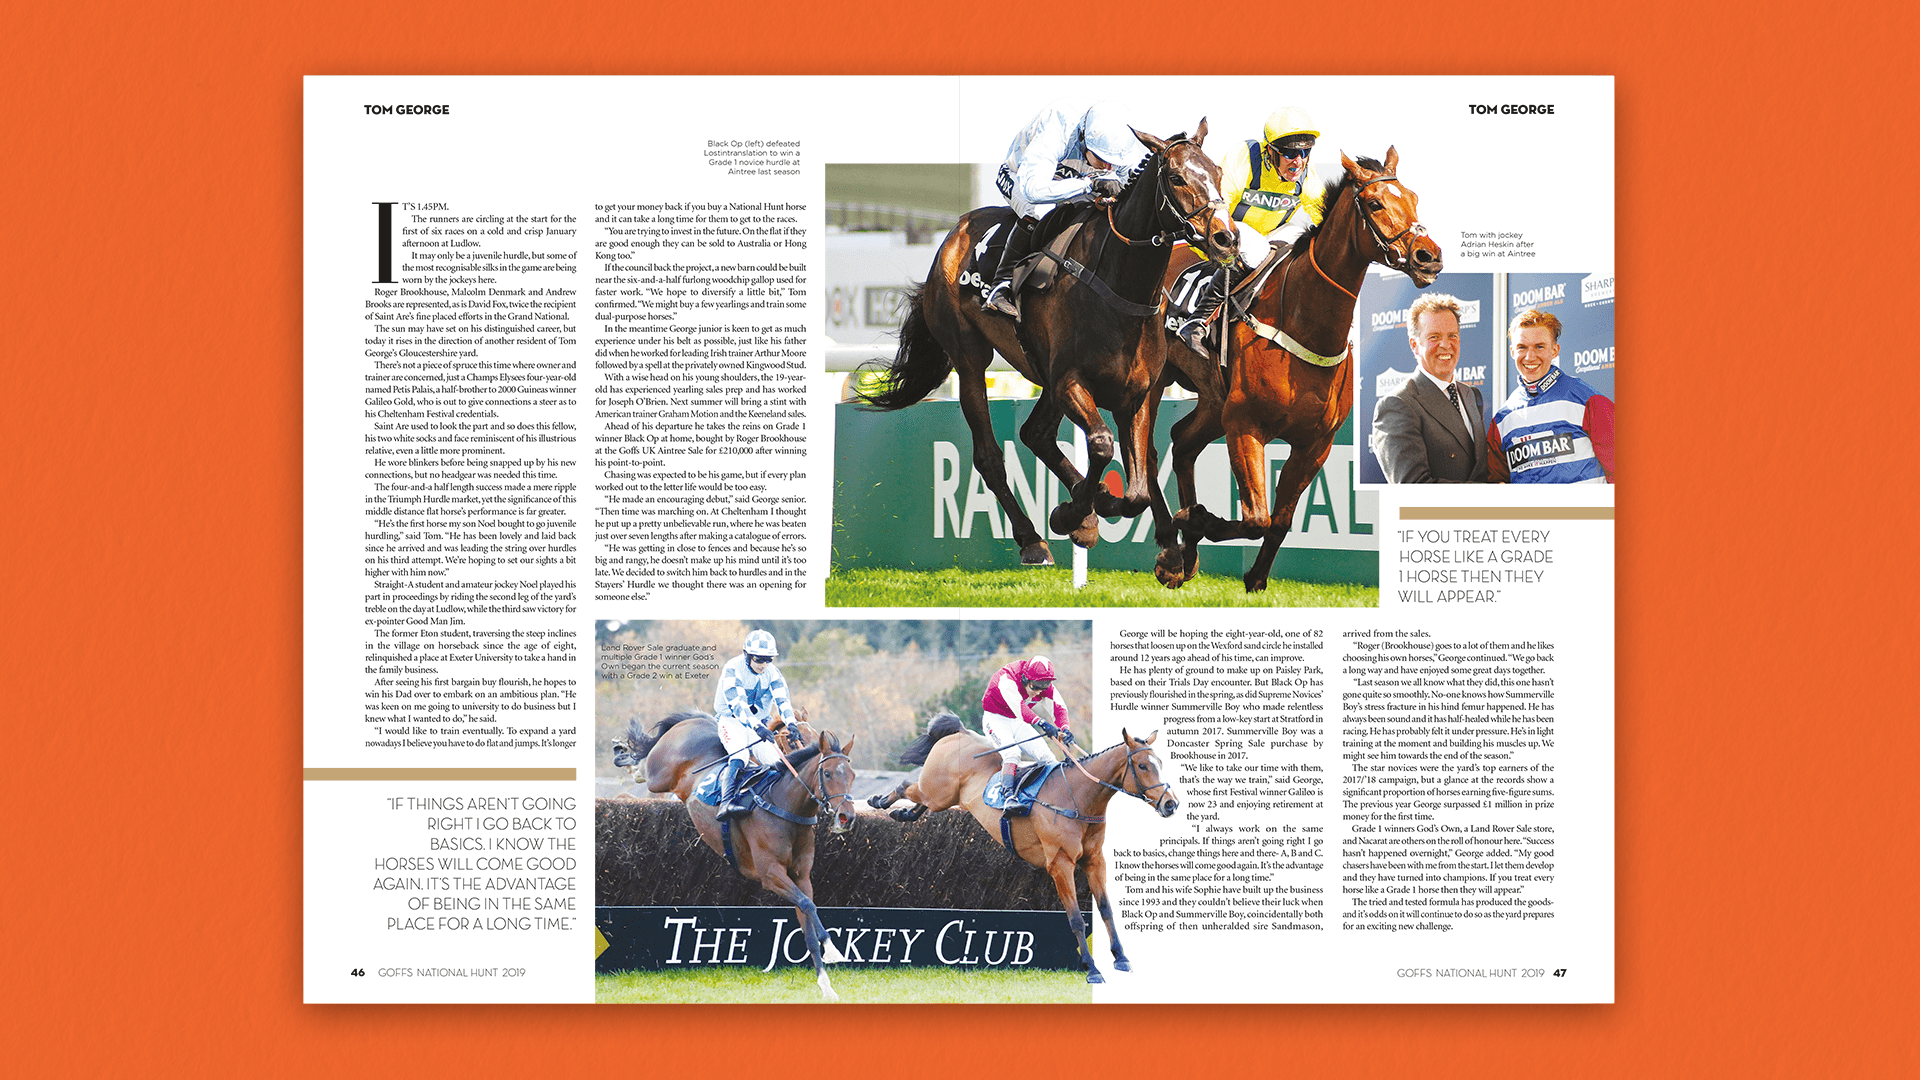 Goffs National Hunt 2019 Feature Spread D